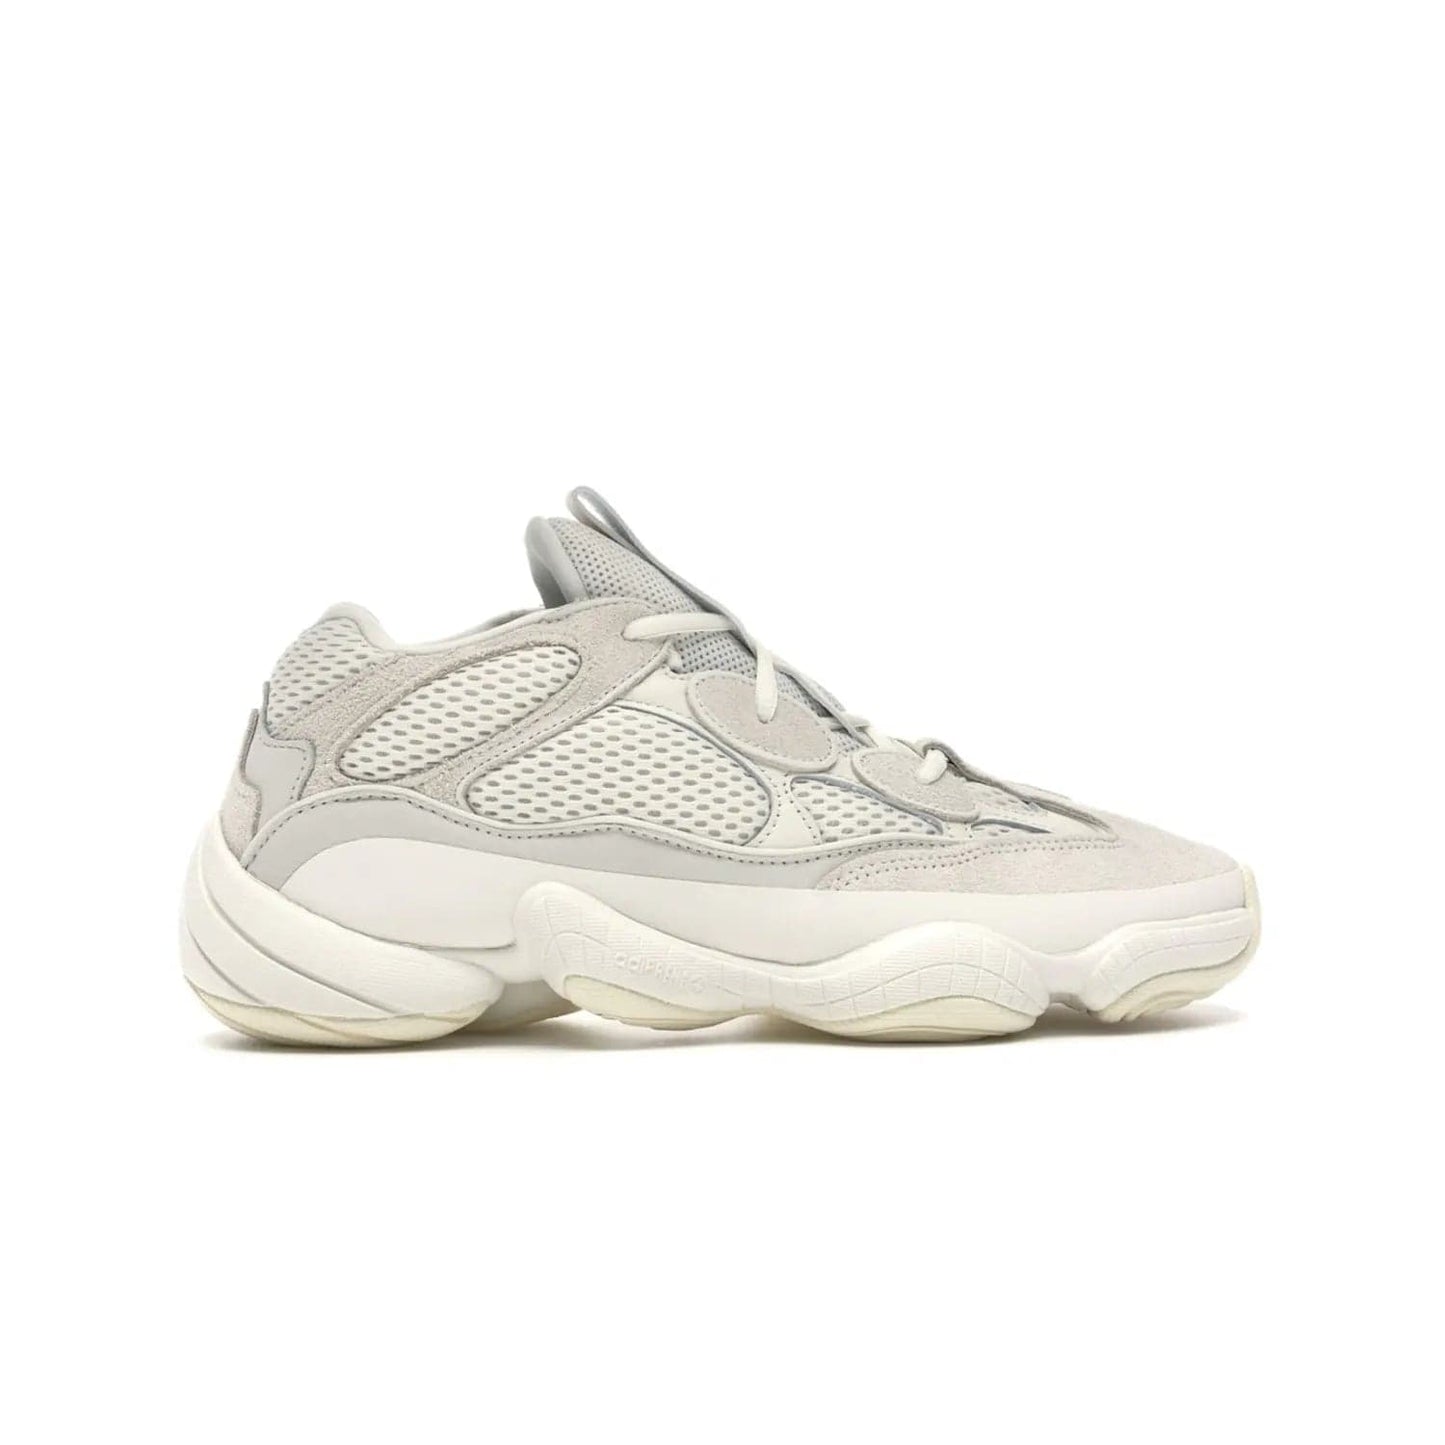 adidas Yeezy 500 Bone White - Image 36 - Only at www.BallersClubKickz.com - Classic look perfect for any sneaker collection. The adidas Yeezy 500 "Bone White" blends a white mesh upper with suede overlays & a chunky midsole inspired by the Adidas KB3. Complimented by a tonal-cream outsole, this timeless style is a must-have.